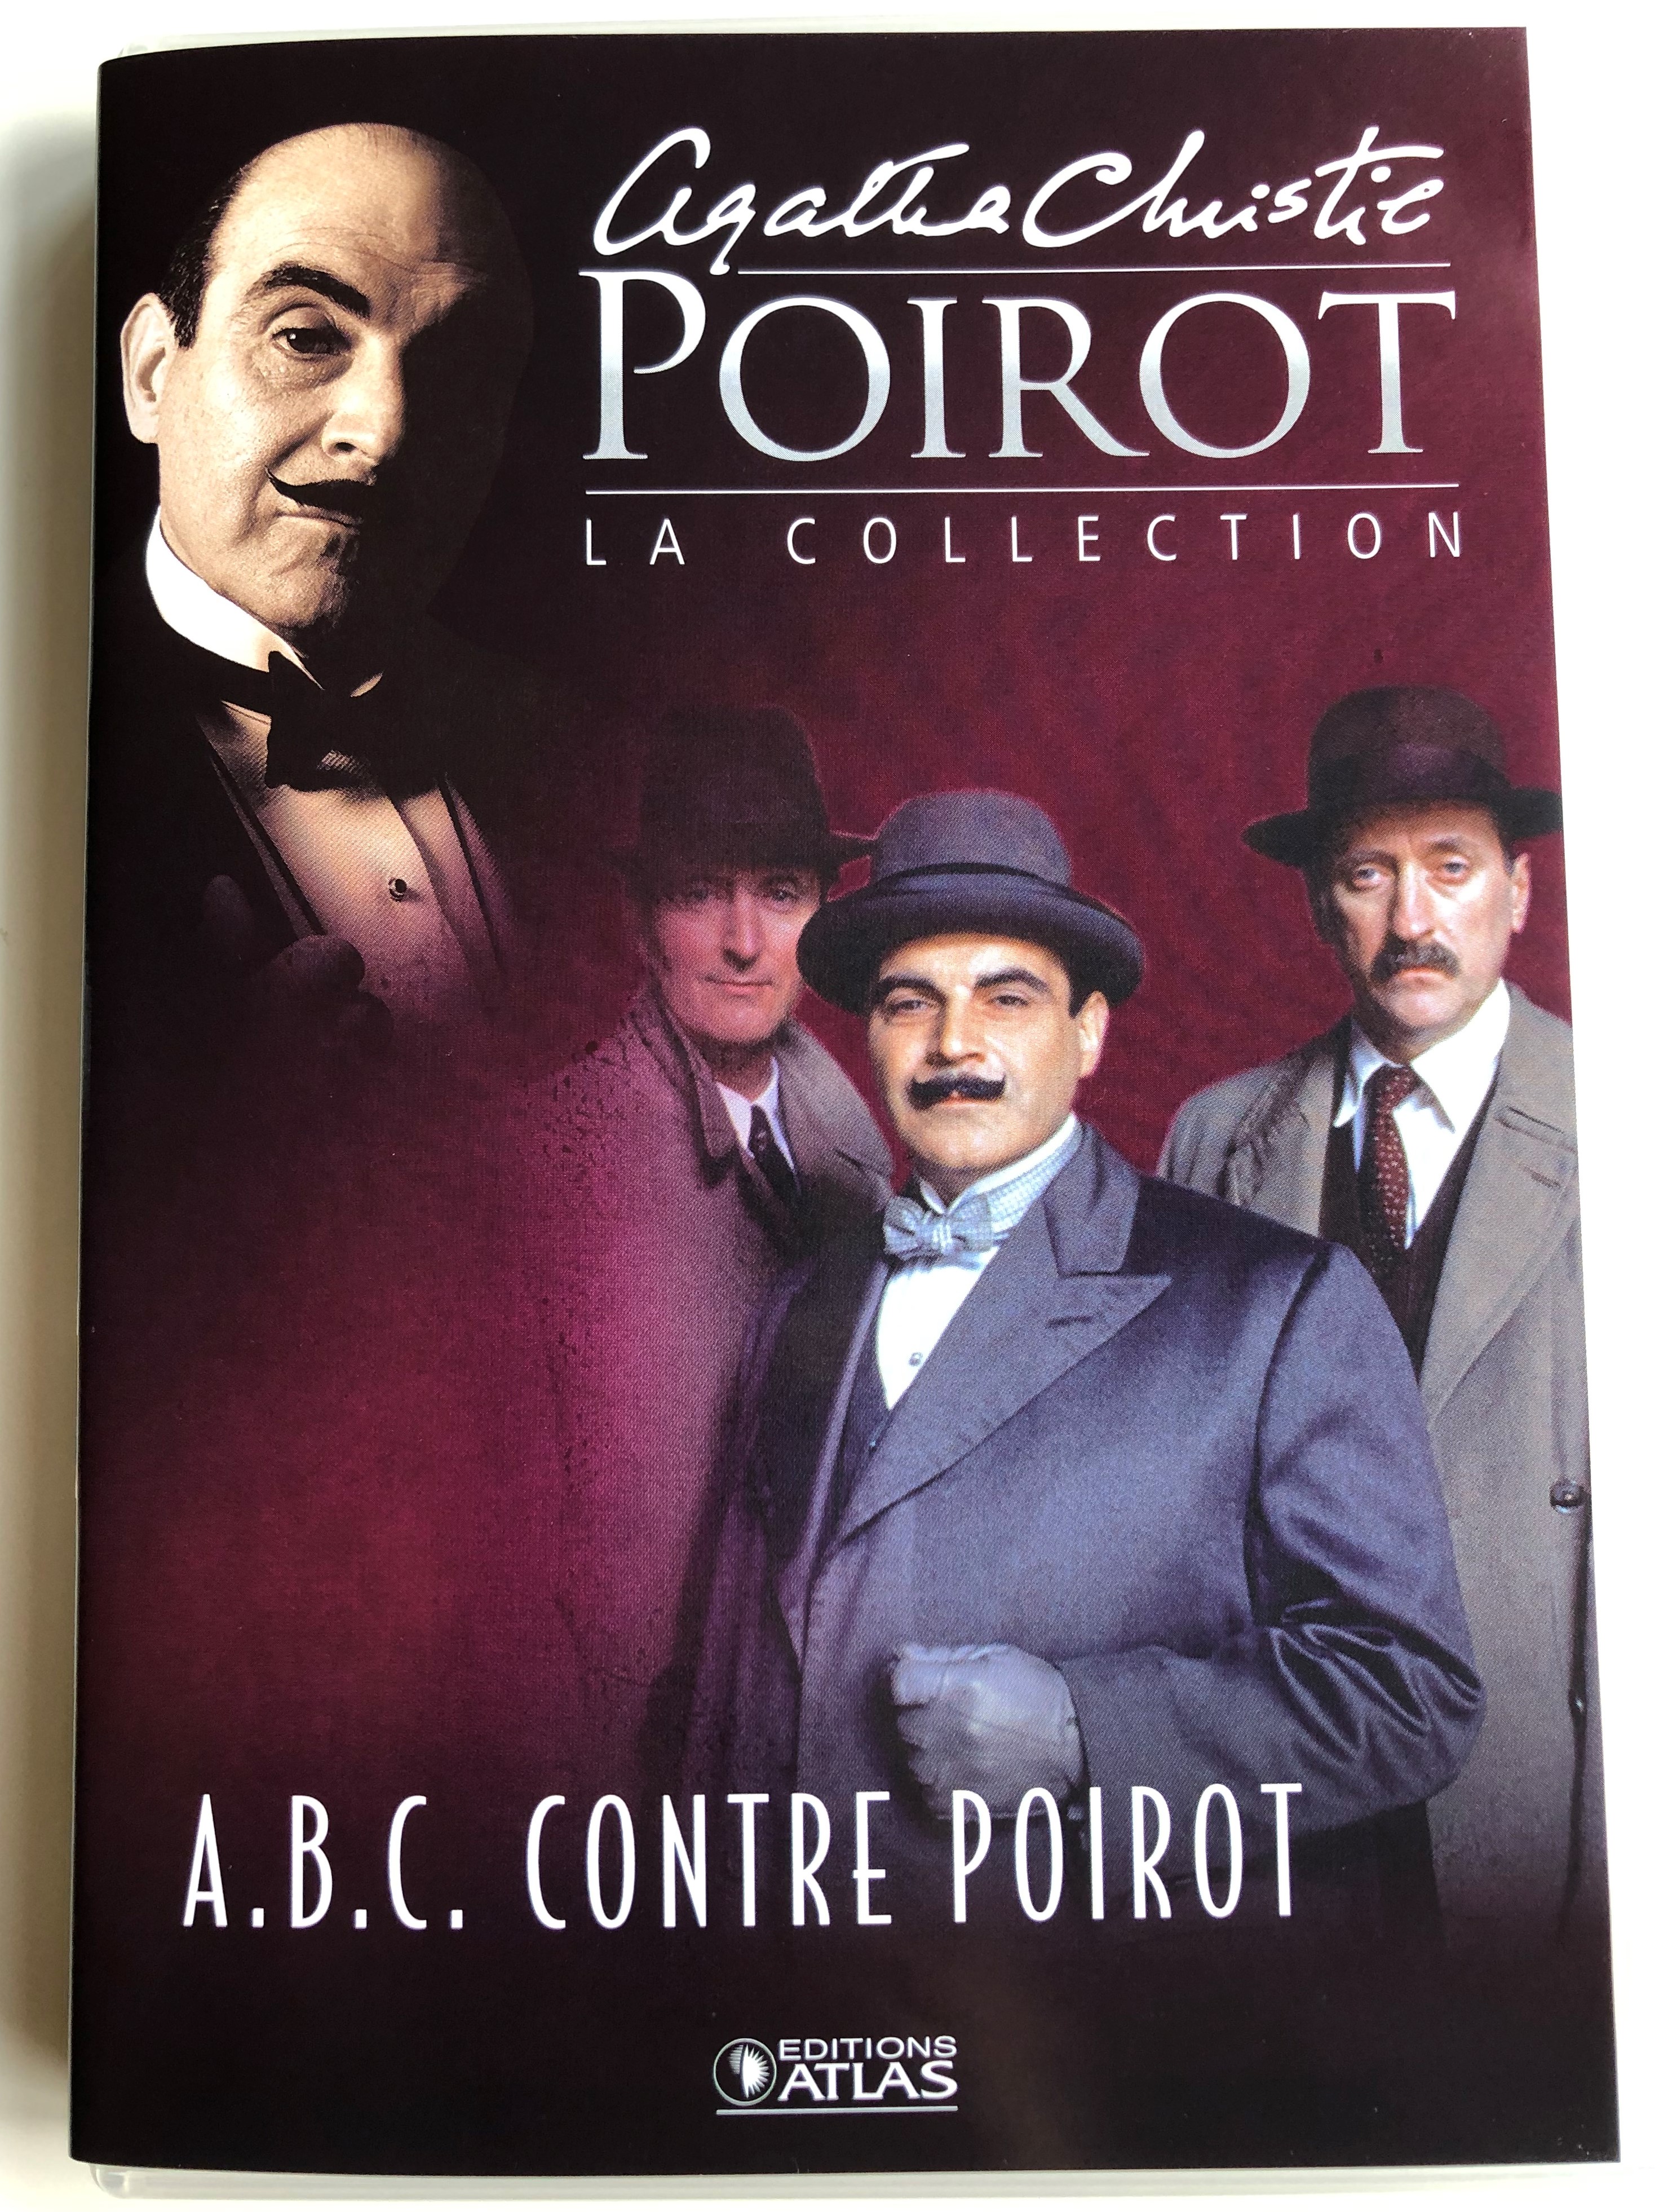 Agatha Christie - Poirot DVD 1992 La Collection A.B.C Contre Poirot /  Directed by Andrew Grieve / Starring: David Suchet, Hugh Fraser, Philip  Jackson - Bible in My Language